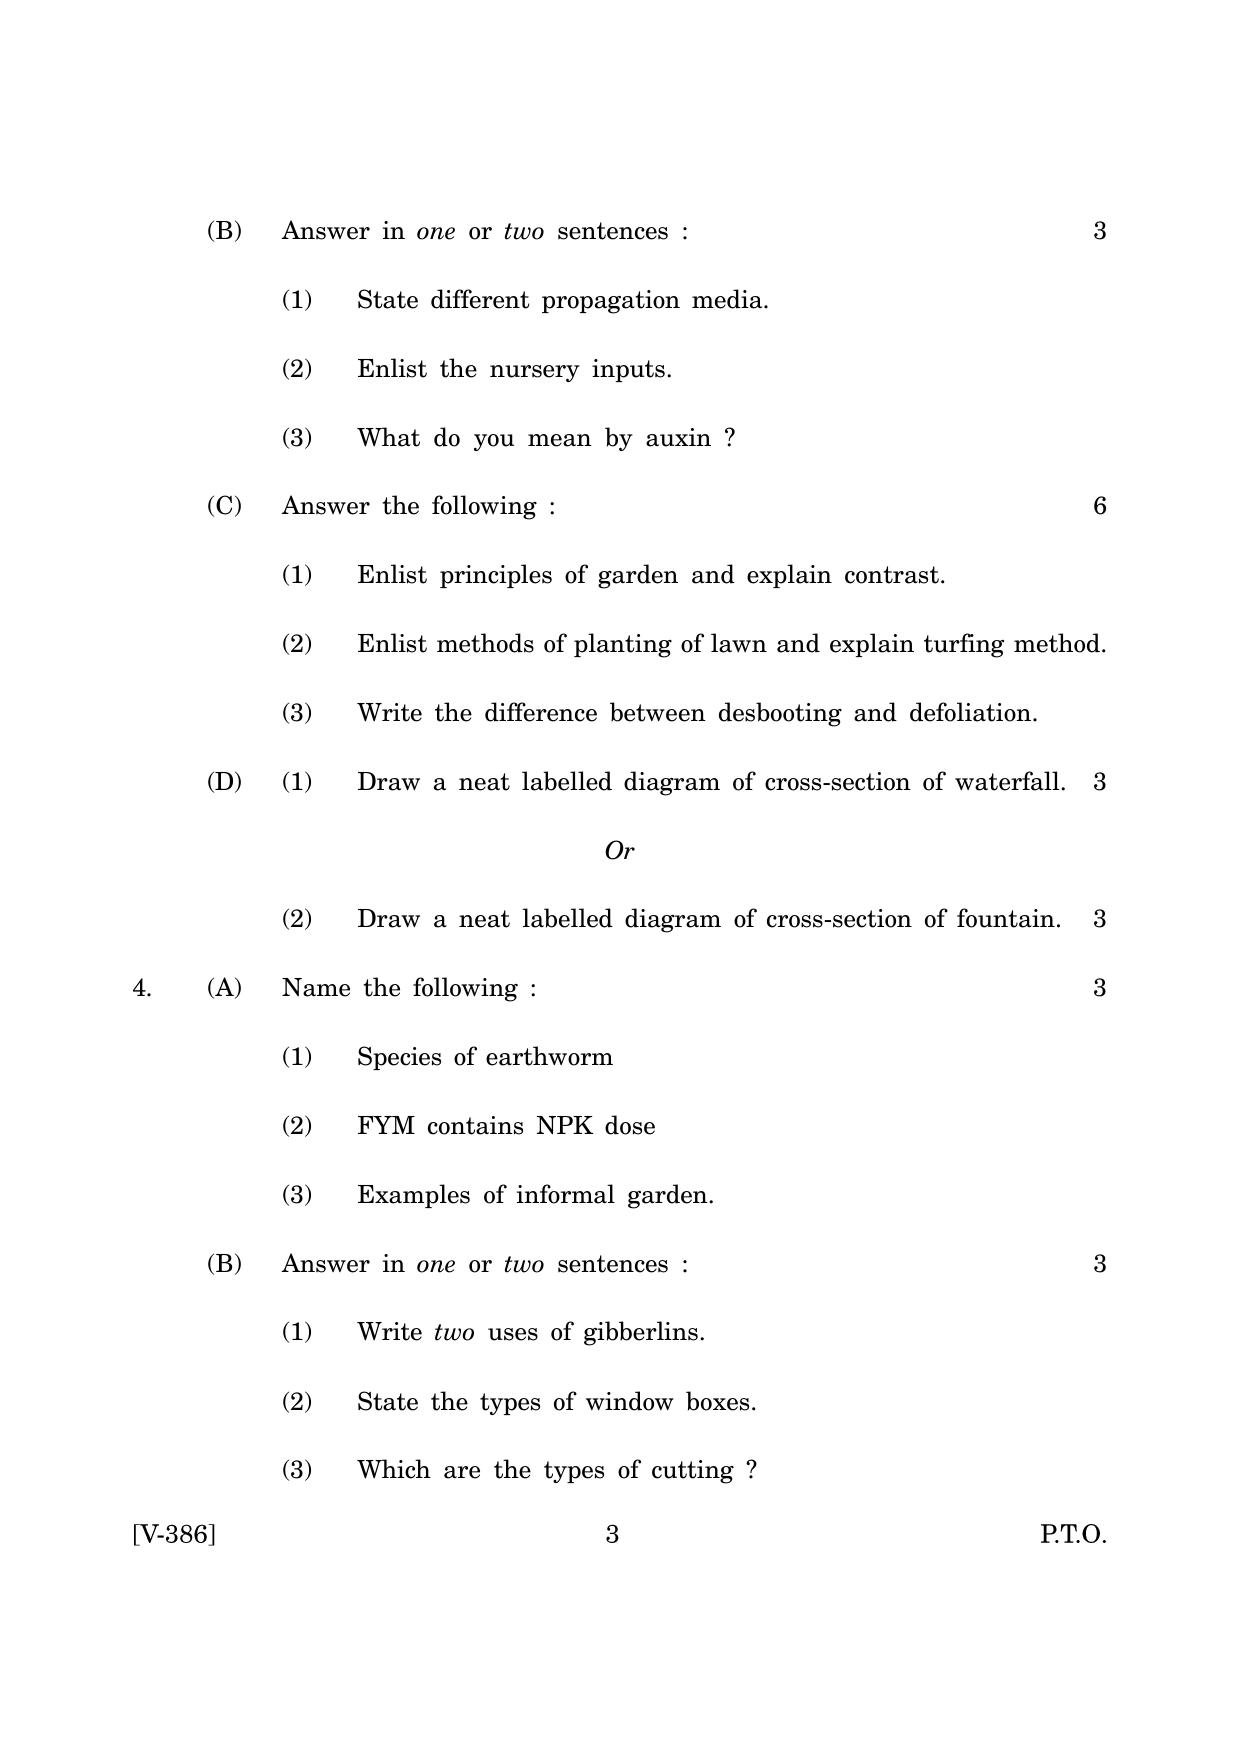 Goa Board Class 12 Gardening & Landscaping   (March 2019) Question Paper - Page 3